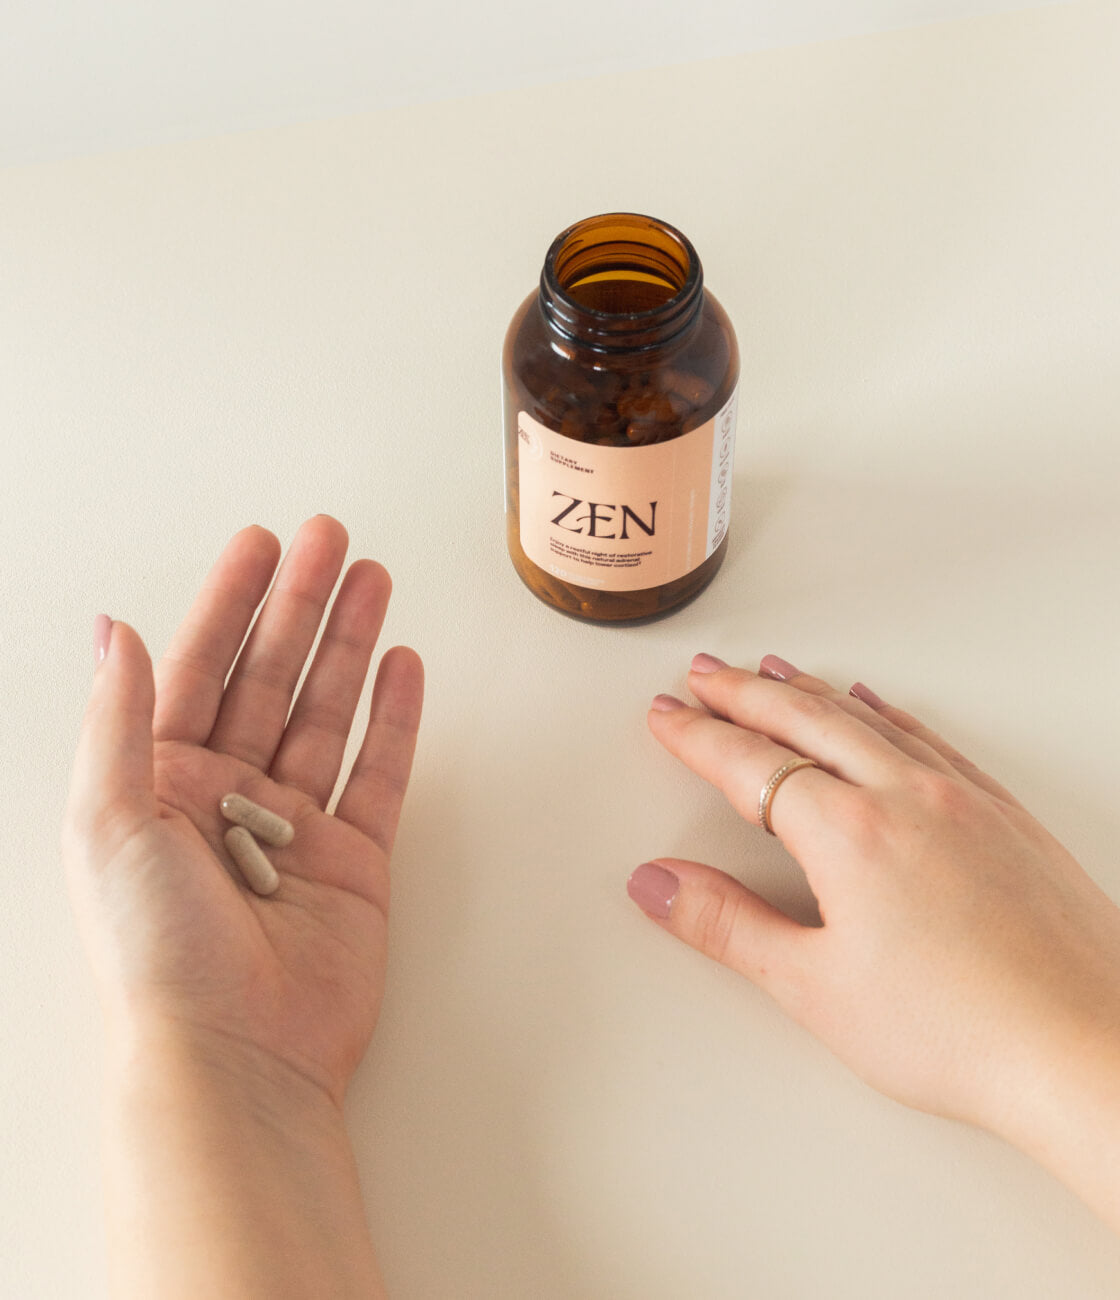 Our dietary supplement capsules are vegan, using hypromellose and Rice flour, making them gluten free and yeast free. The capsules are small enough to be comfortable to swallow. [AD: A feminine hand is holding 2 capsules, small enough to be nestled in the center of the palm]